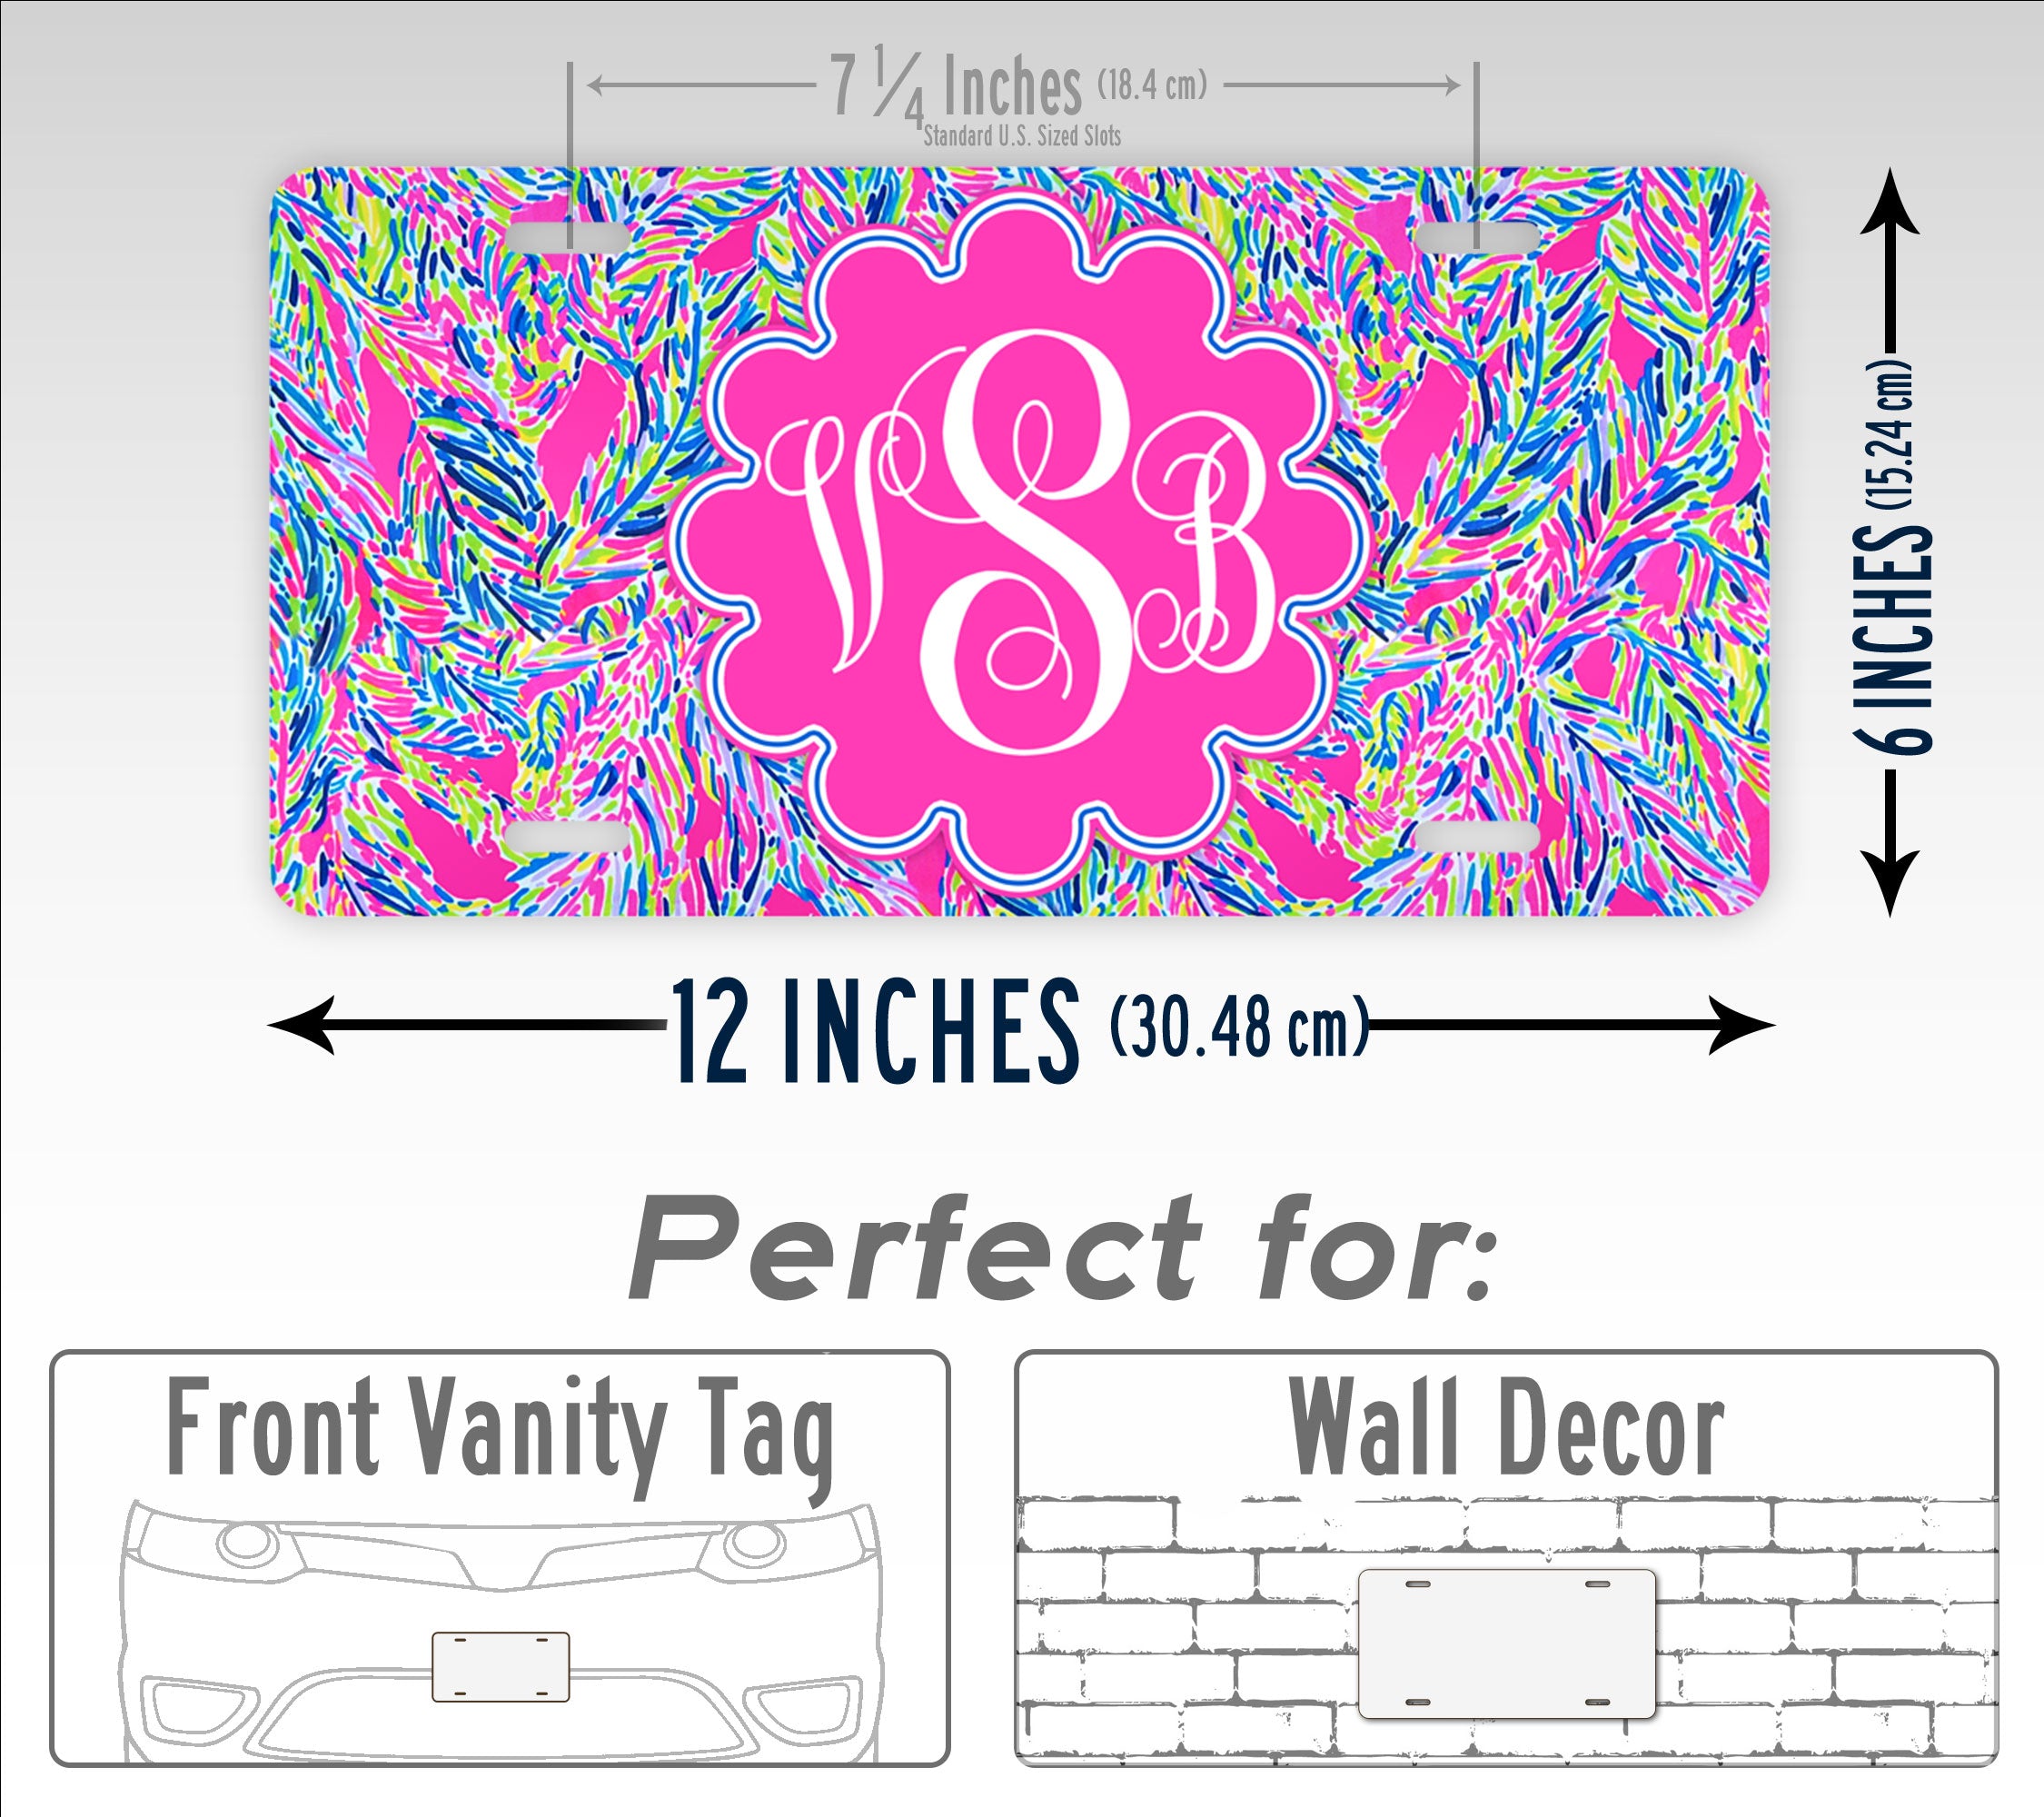 Personalized Pink Lily Fern Design Monogram License Plate